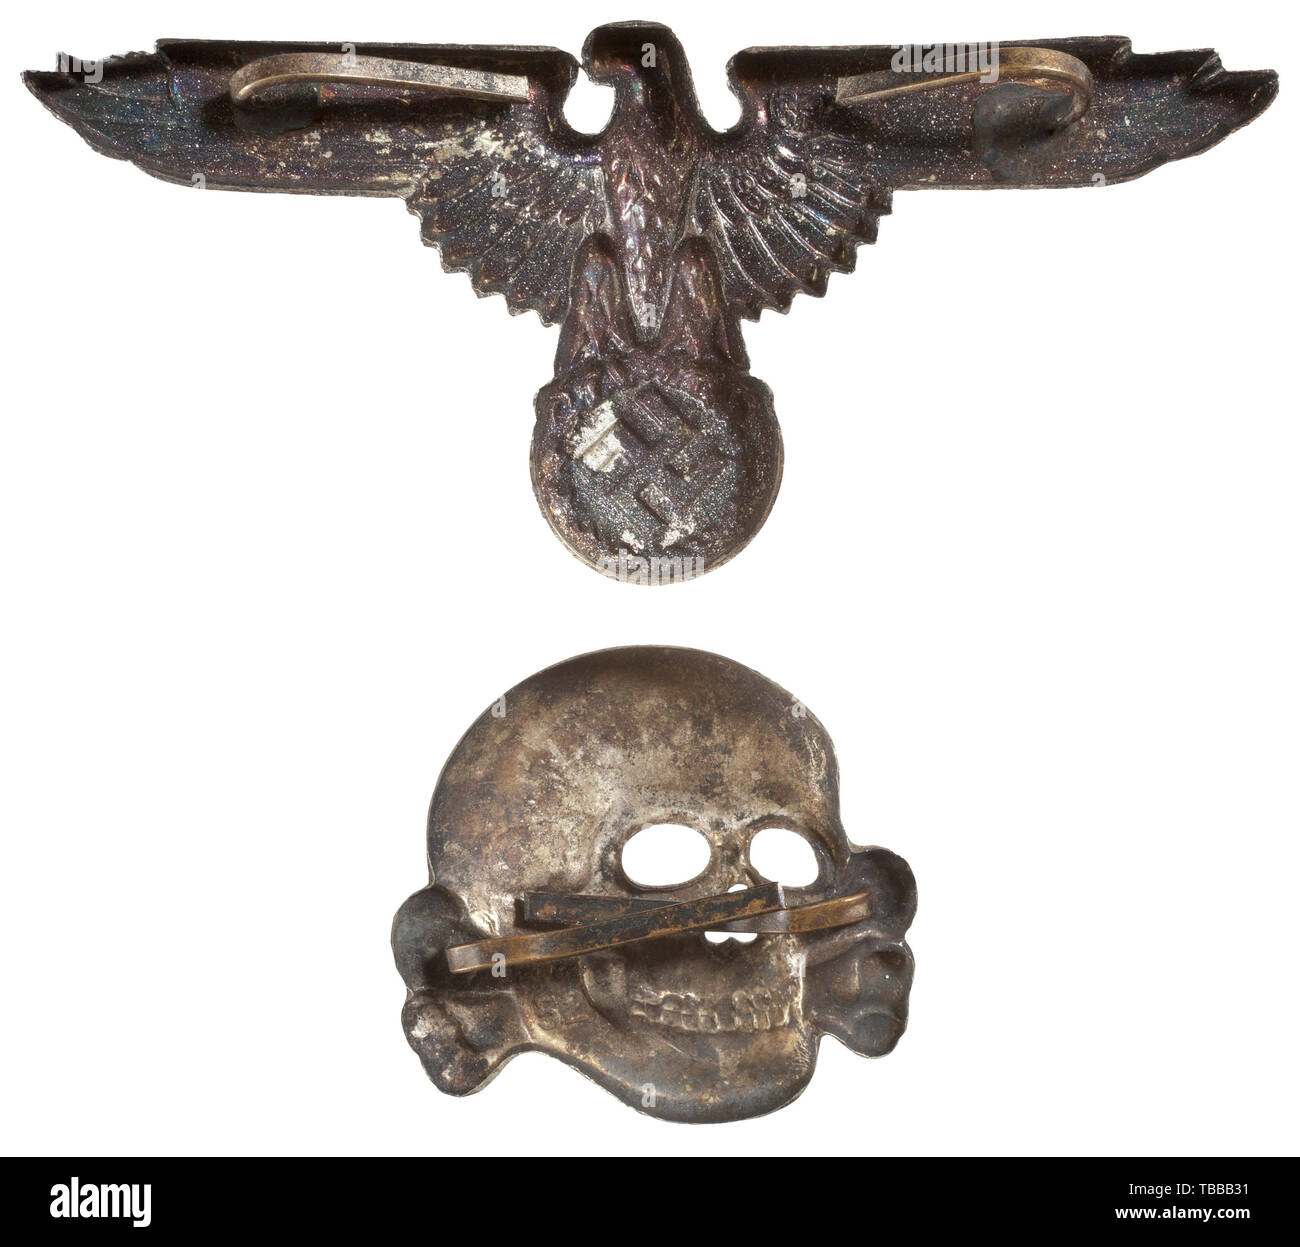 THE JOHN PEPERA COLLECTION, A matching set of SS insignia for the visor cap, Silvered cupal, the eagle marked "RZM 394-35", the skull "RZM M1/52"., Editorial-Use-Only Stock Photo